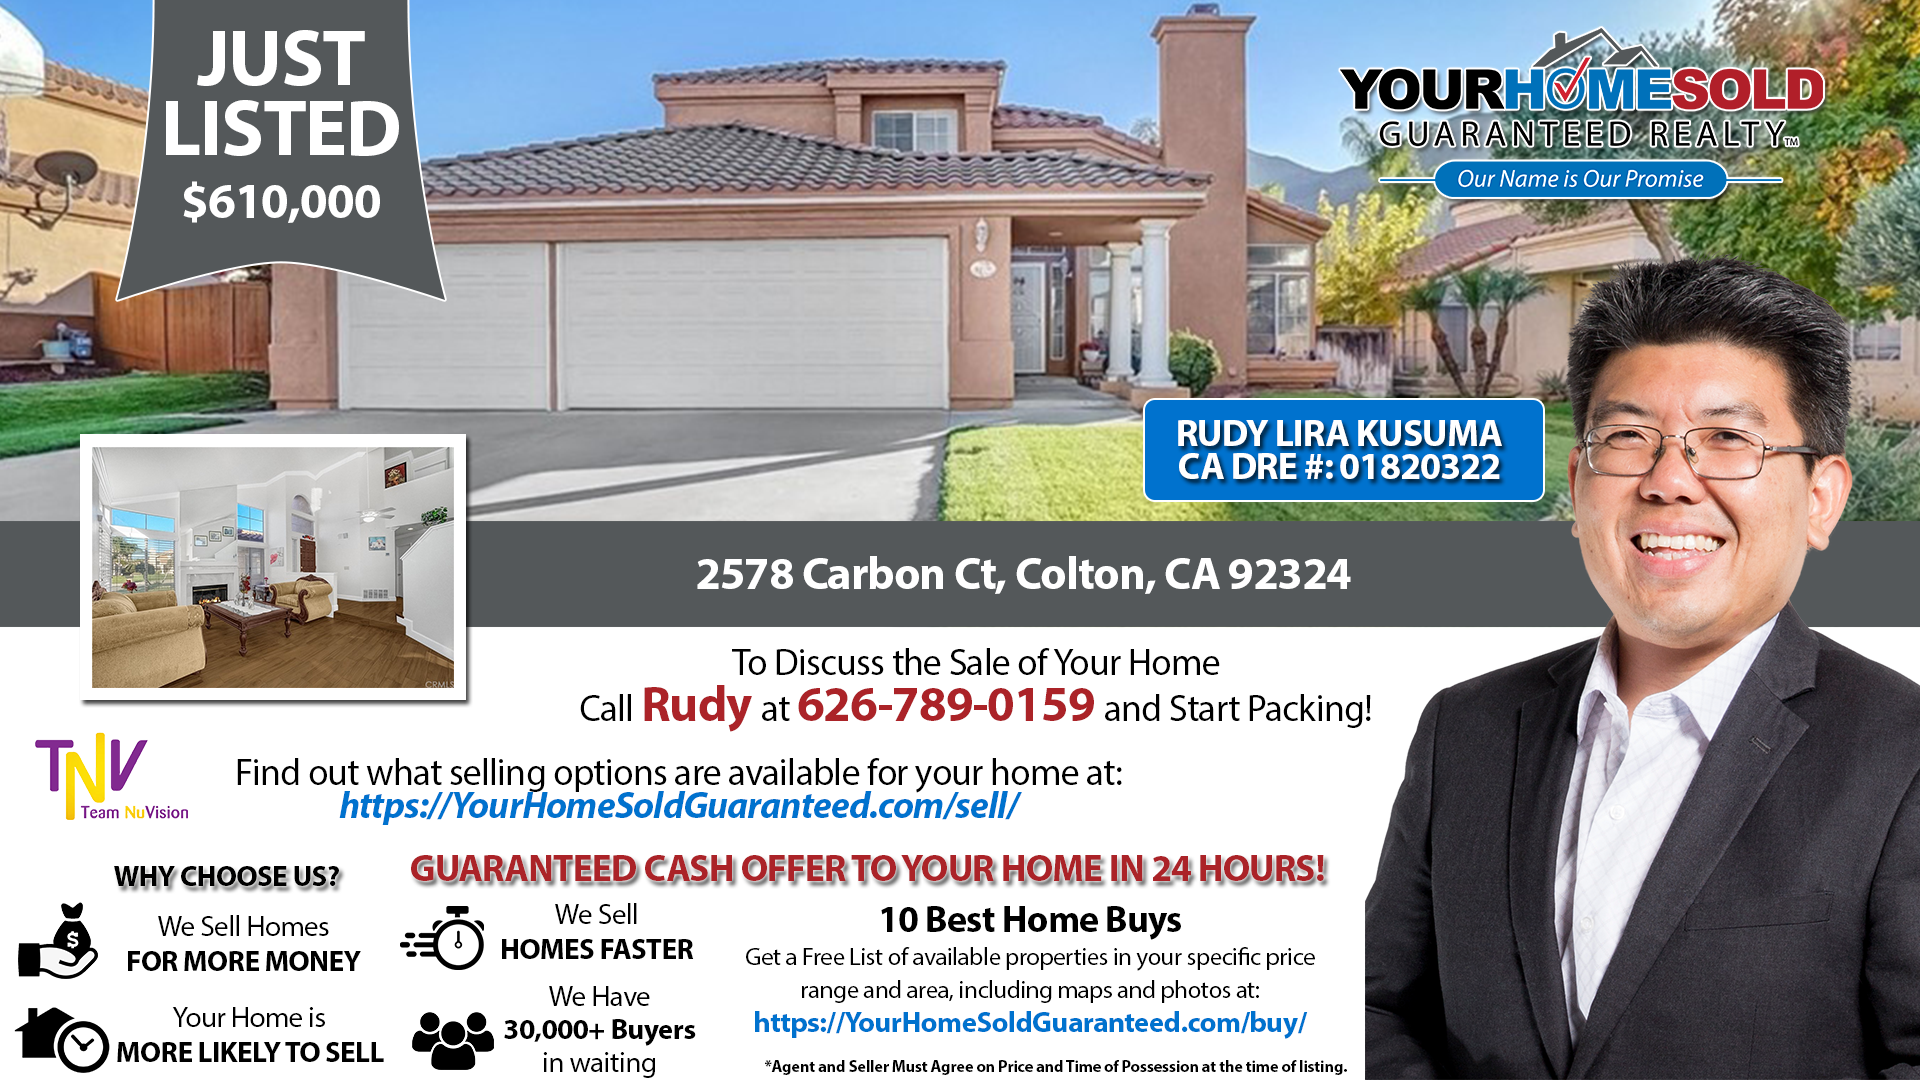 Your Dream Home Is Now For Sale!